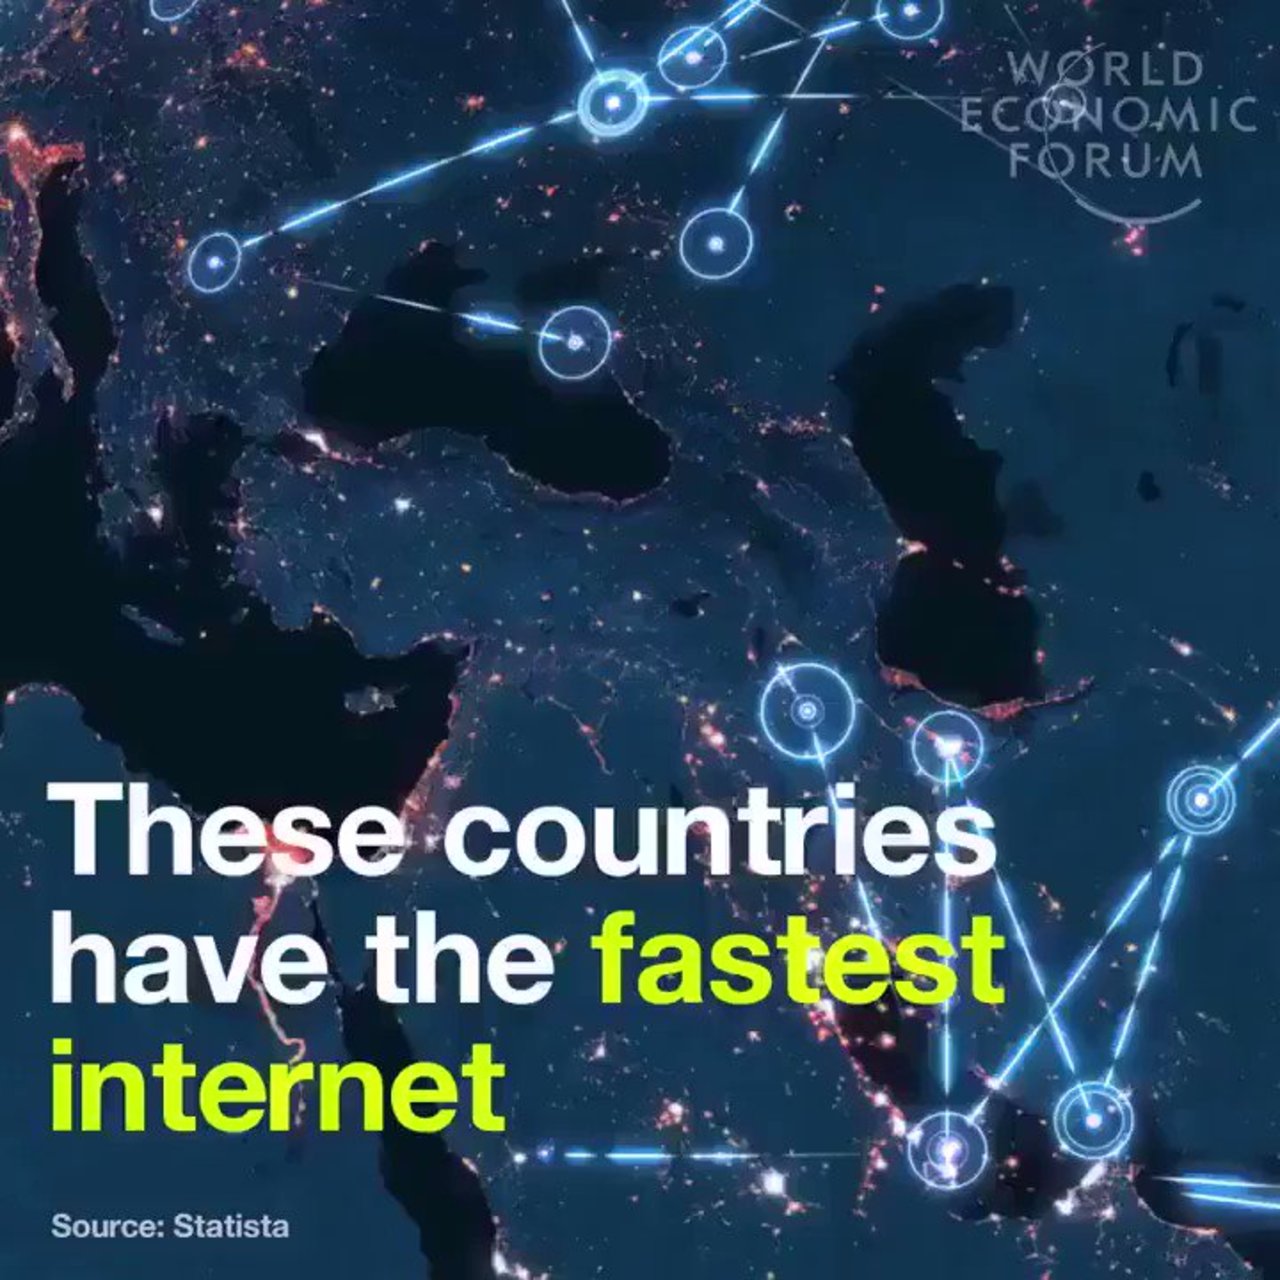 These countries have the fastest #Internet by @wef #AR #Innovation #Business #Influencer #Operation Cc: @enricomolinari @MikeQuindazzi @SpirosMargaris https://t.co/4fWdcHZNEn